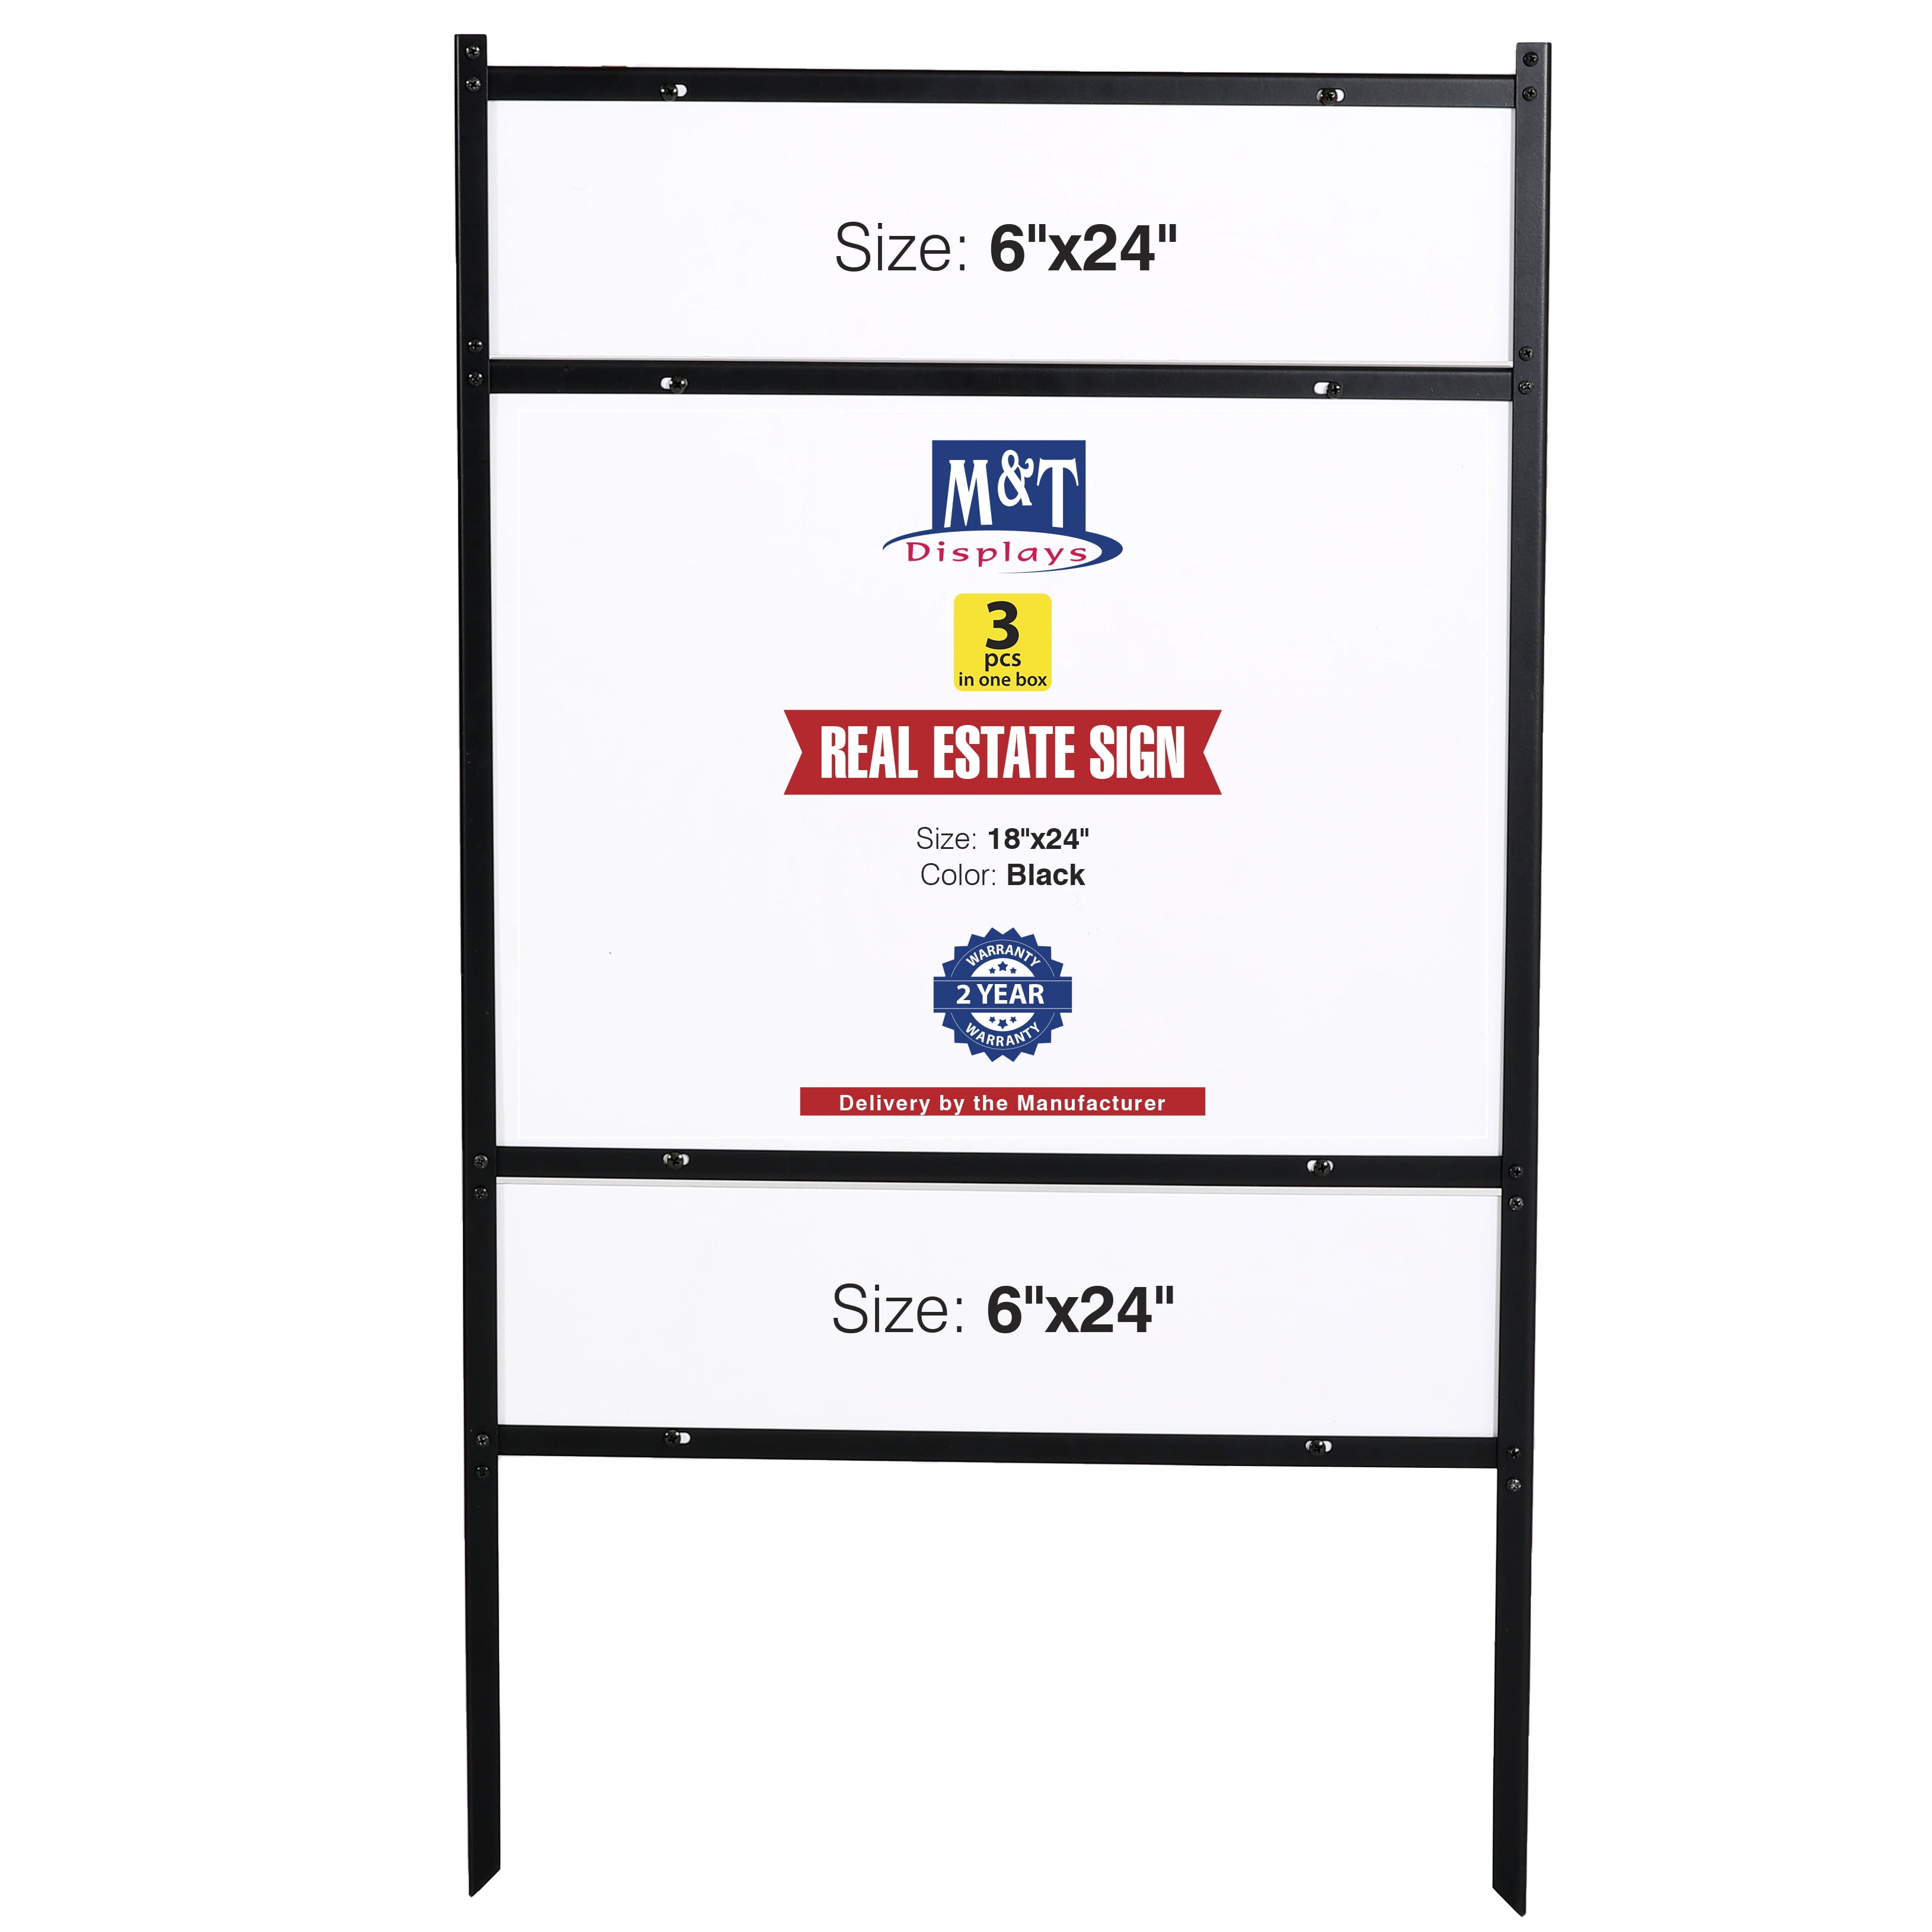 24"W x 18"H Insert Metal H-Frame Real Estate Yard Sign with Rider Slide/Bolt-In 